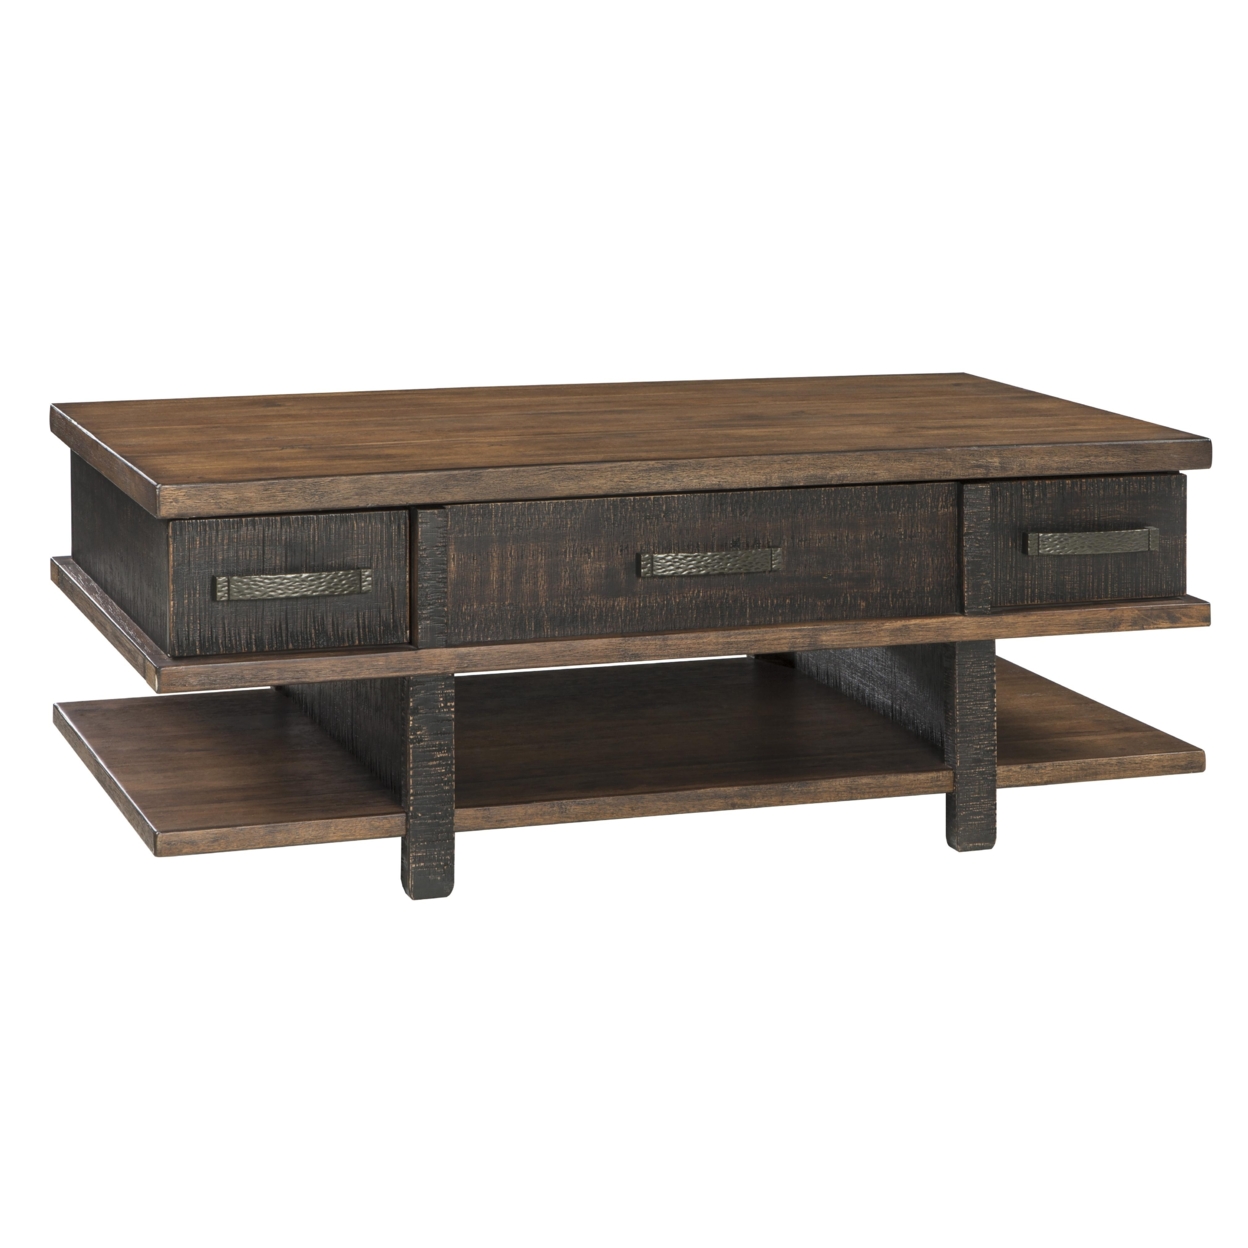 Wooden Lift Top Cocktail Table With 2 Drawers And 3 Open Shelves, Brown- Saltoro Sherpi